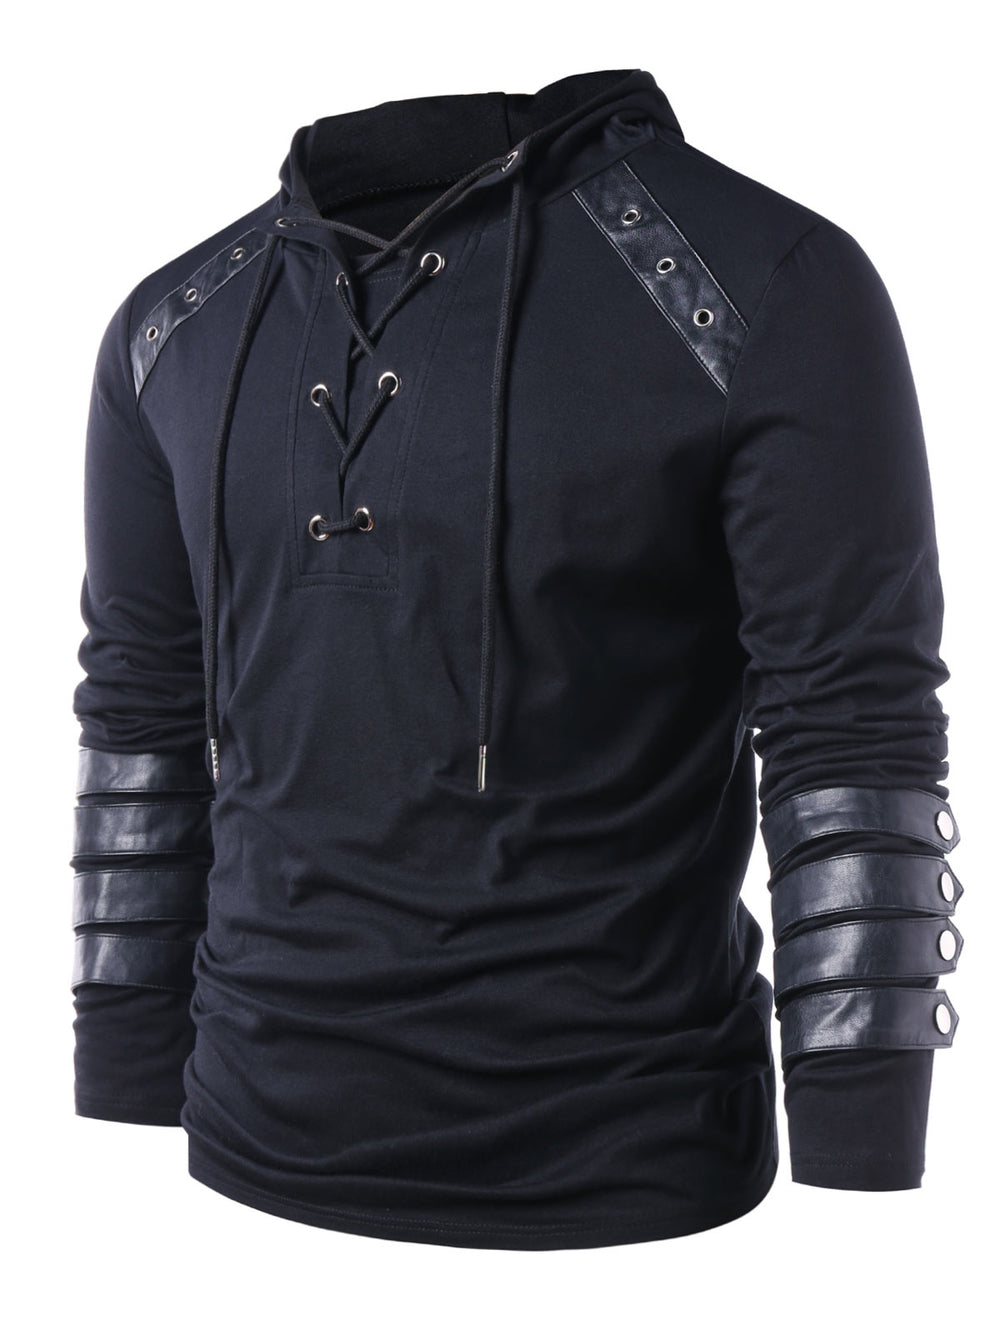 Faux Leather Lace Up Hoodie - Shaners Merchandise